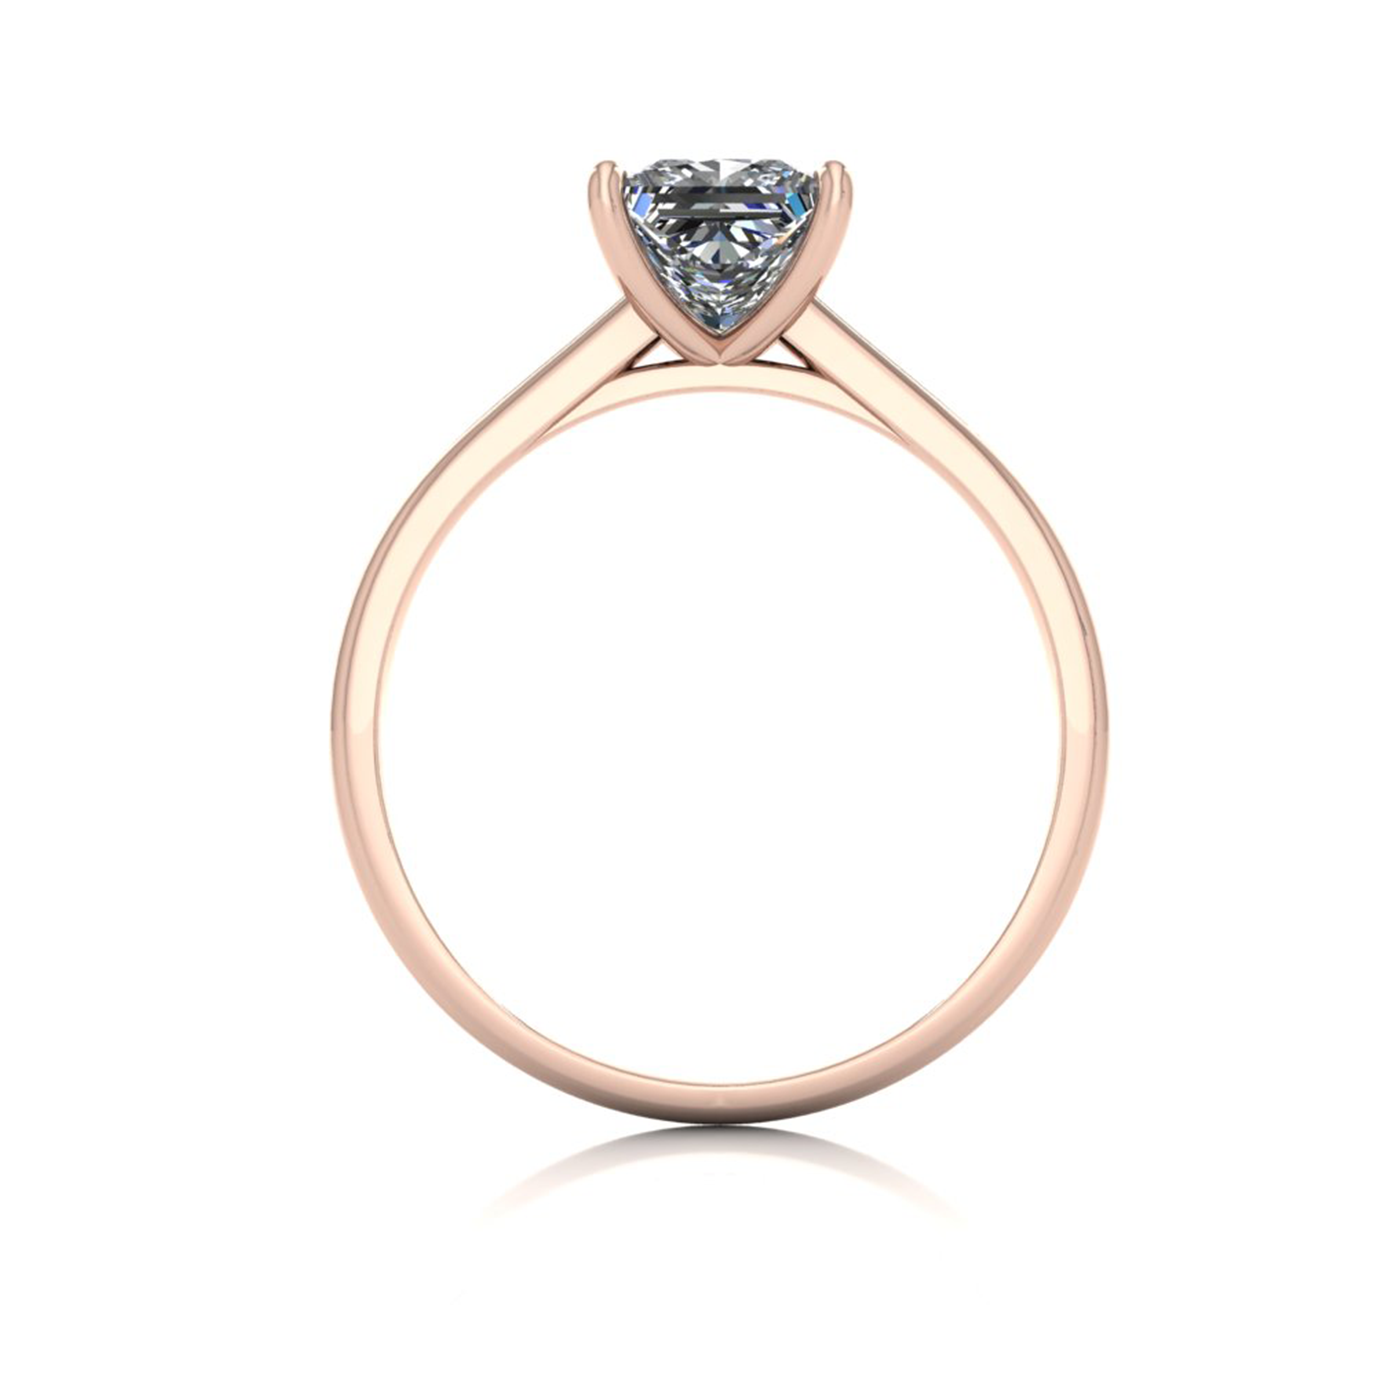 18k rose gold  1,00 ct 4 prongs solitaire princess cut diamond engagement ring with whisper thin band